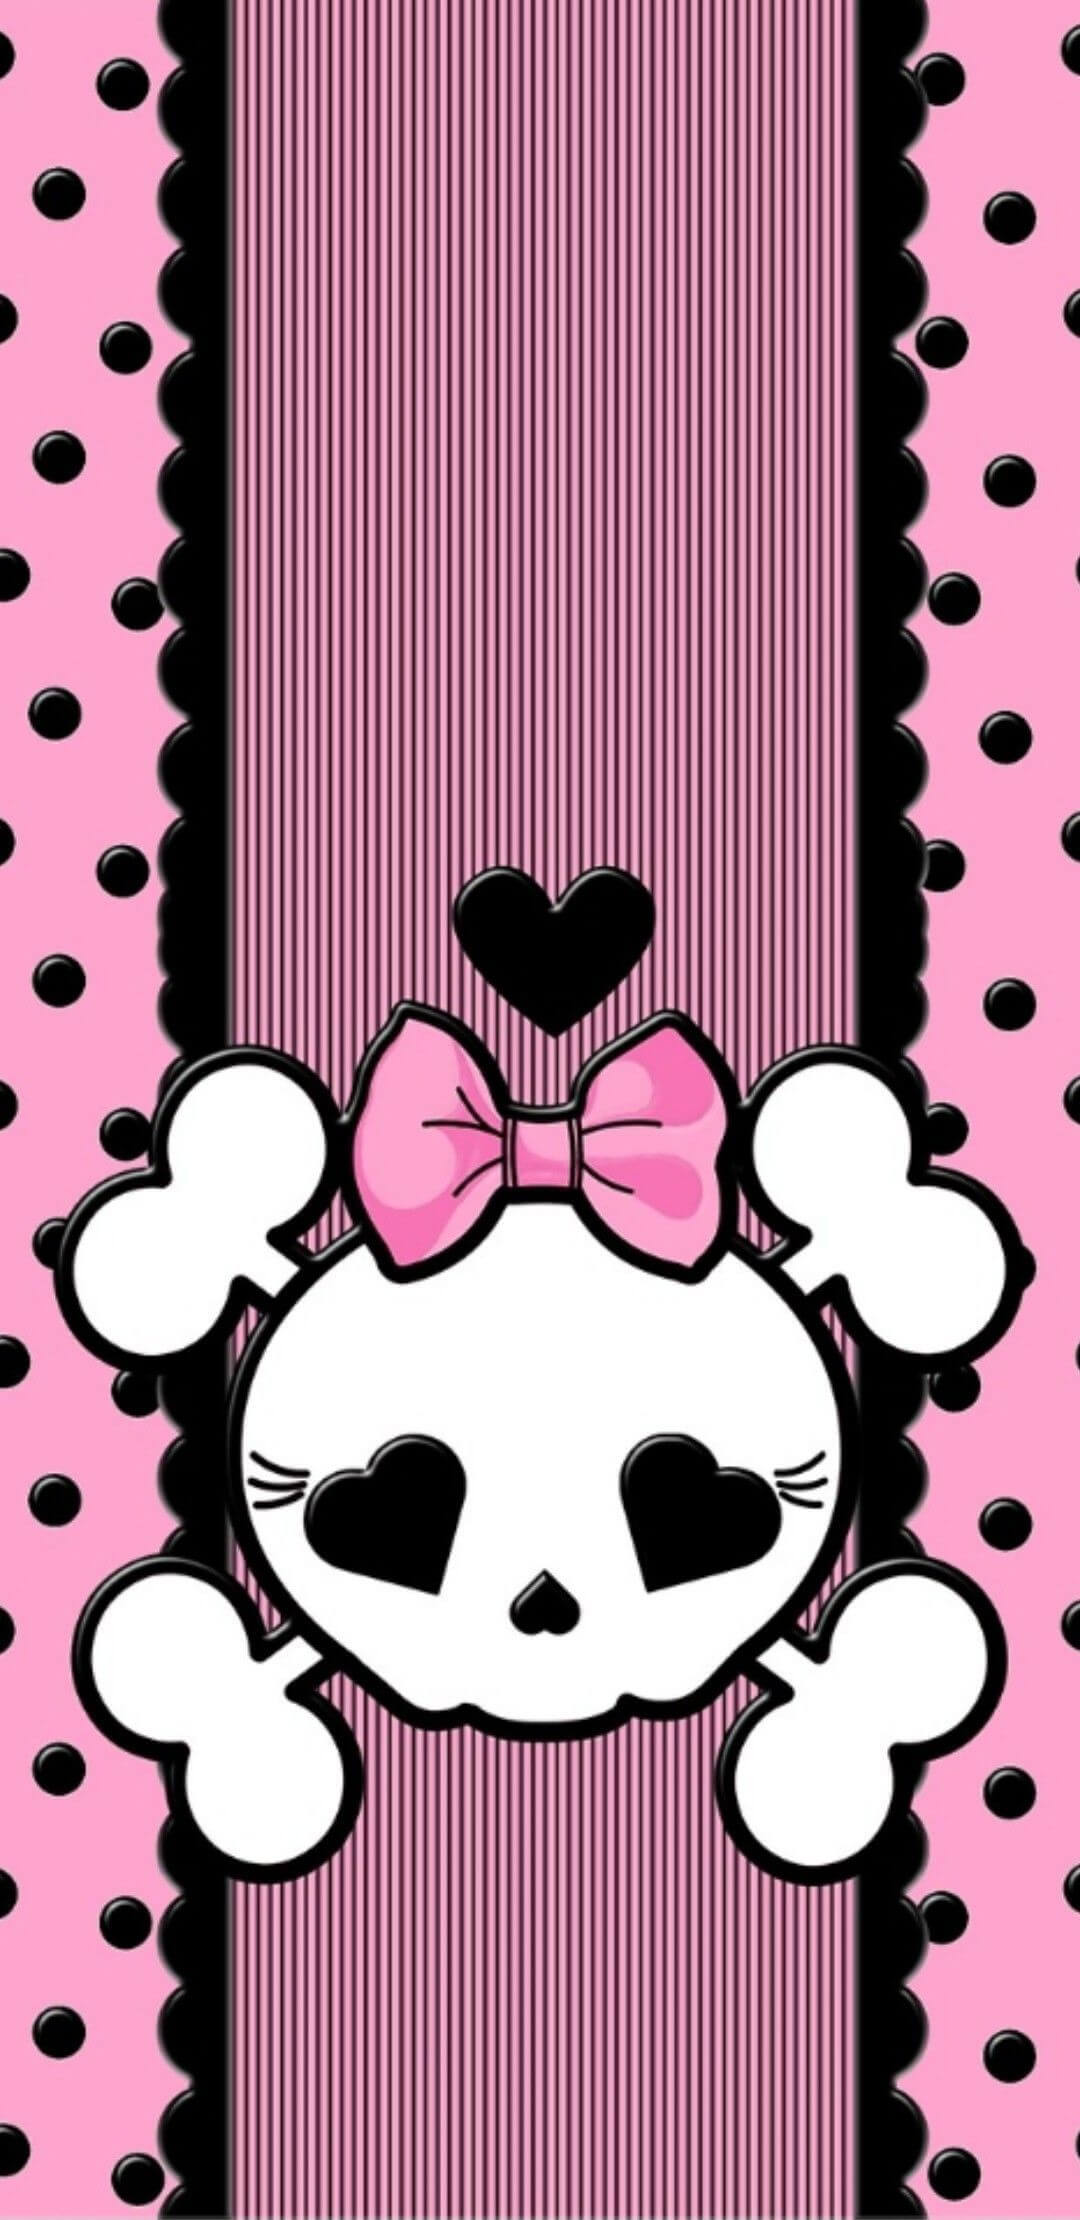 HD Pink and Cute Emo iphone background, Best iPhone Wallpaper and iPhone background, WallpaperUpdate, Best iPhone Wallpaper and iPhone background